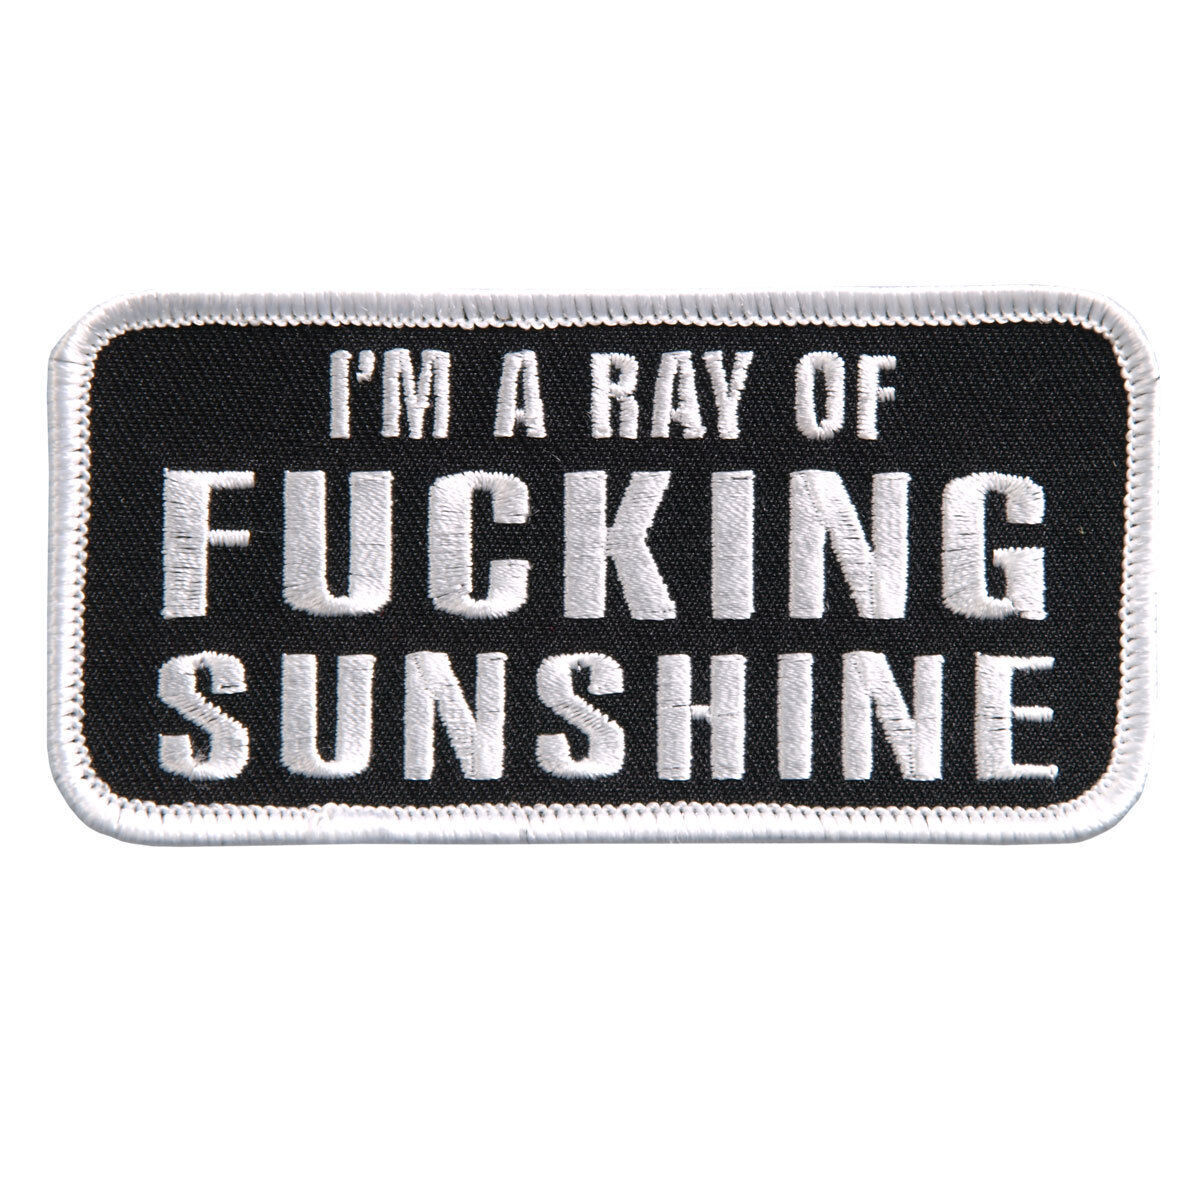 I'm A Ray of Sunshine  EMBROIDERED IRON ON MC FUNNY BIKER PATCH BY MILTACUSA